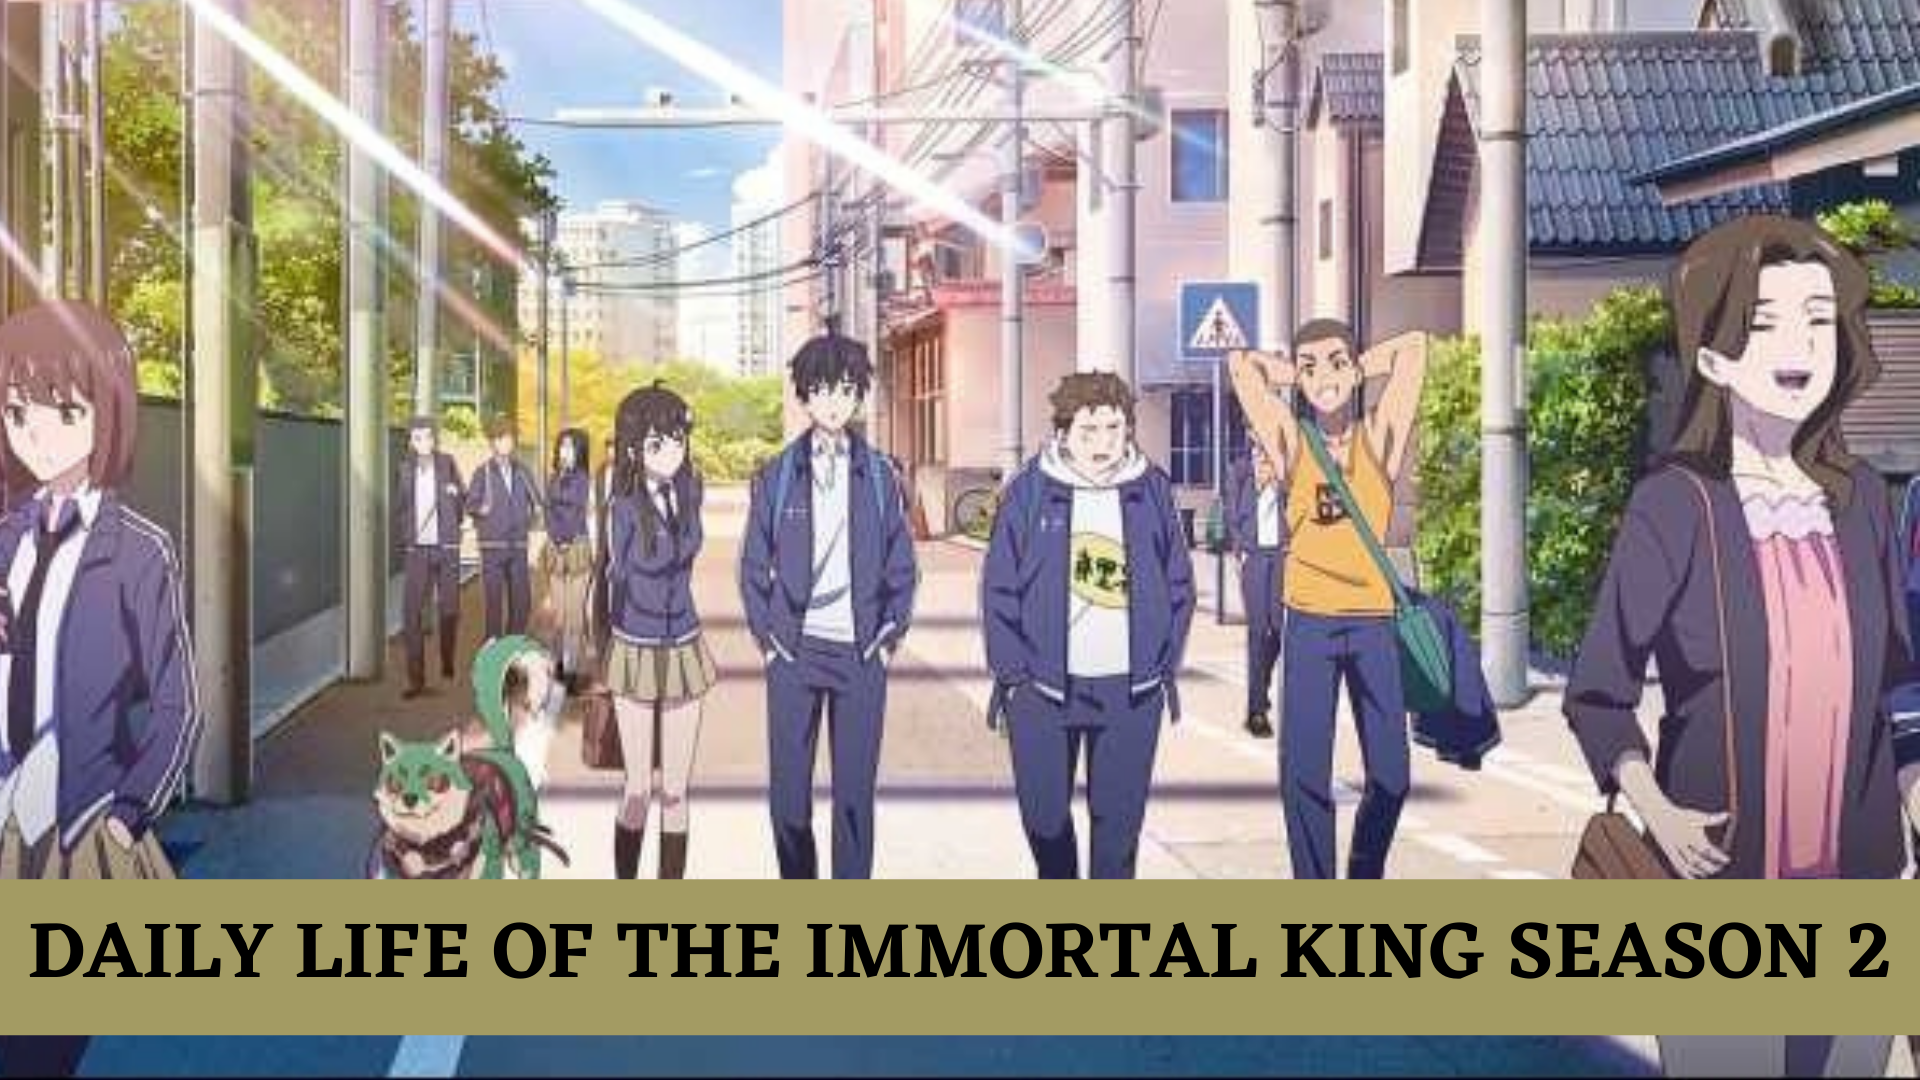 Life immortal the daily king the of